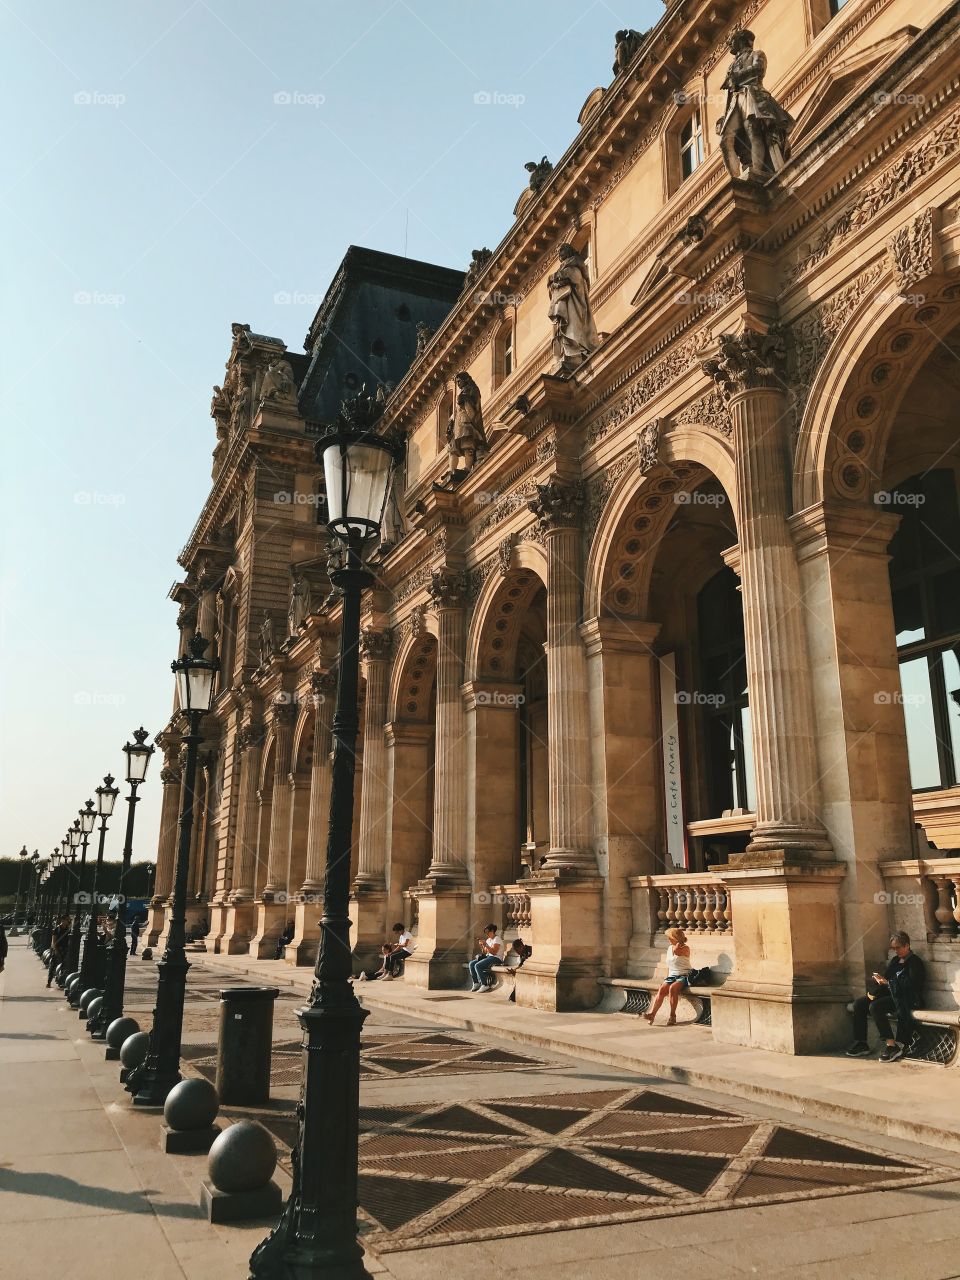 Louvre museum, from the outside. 